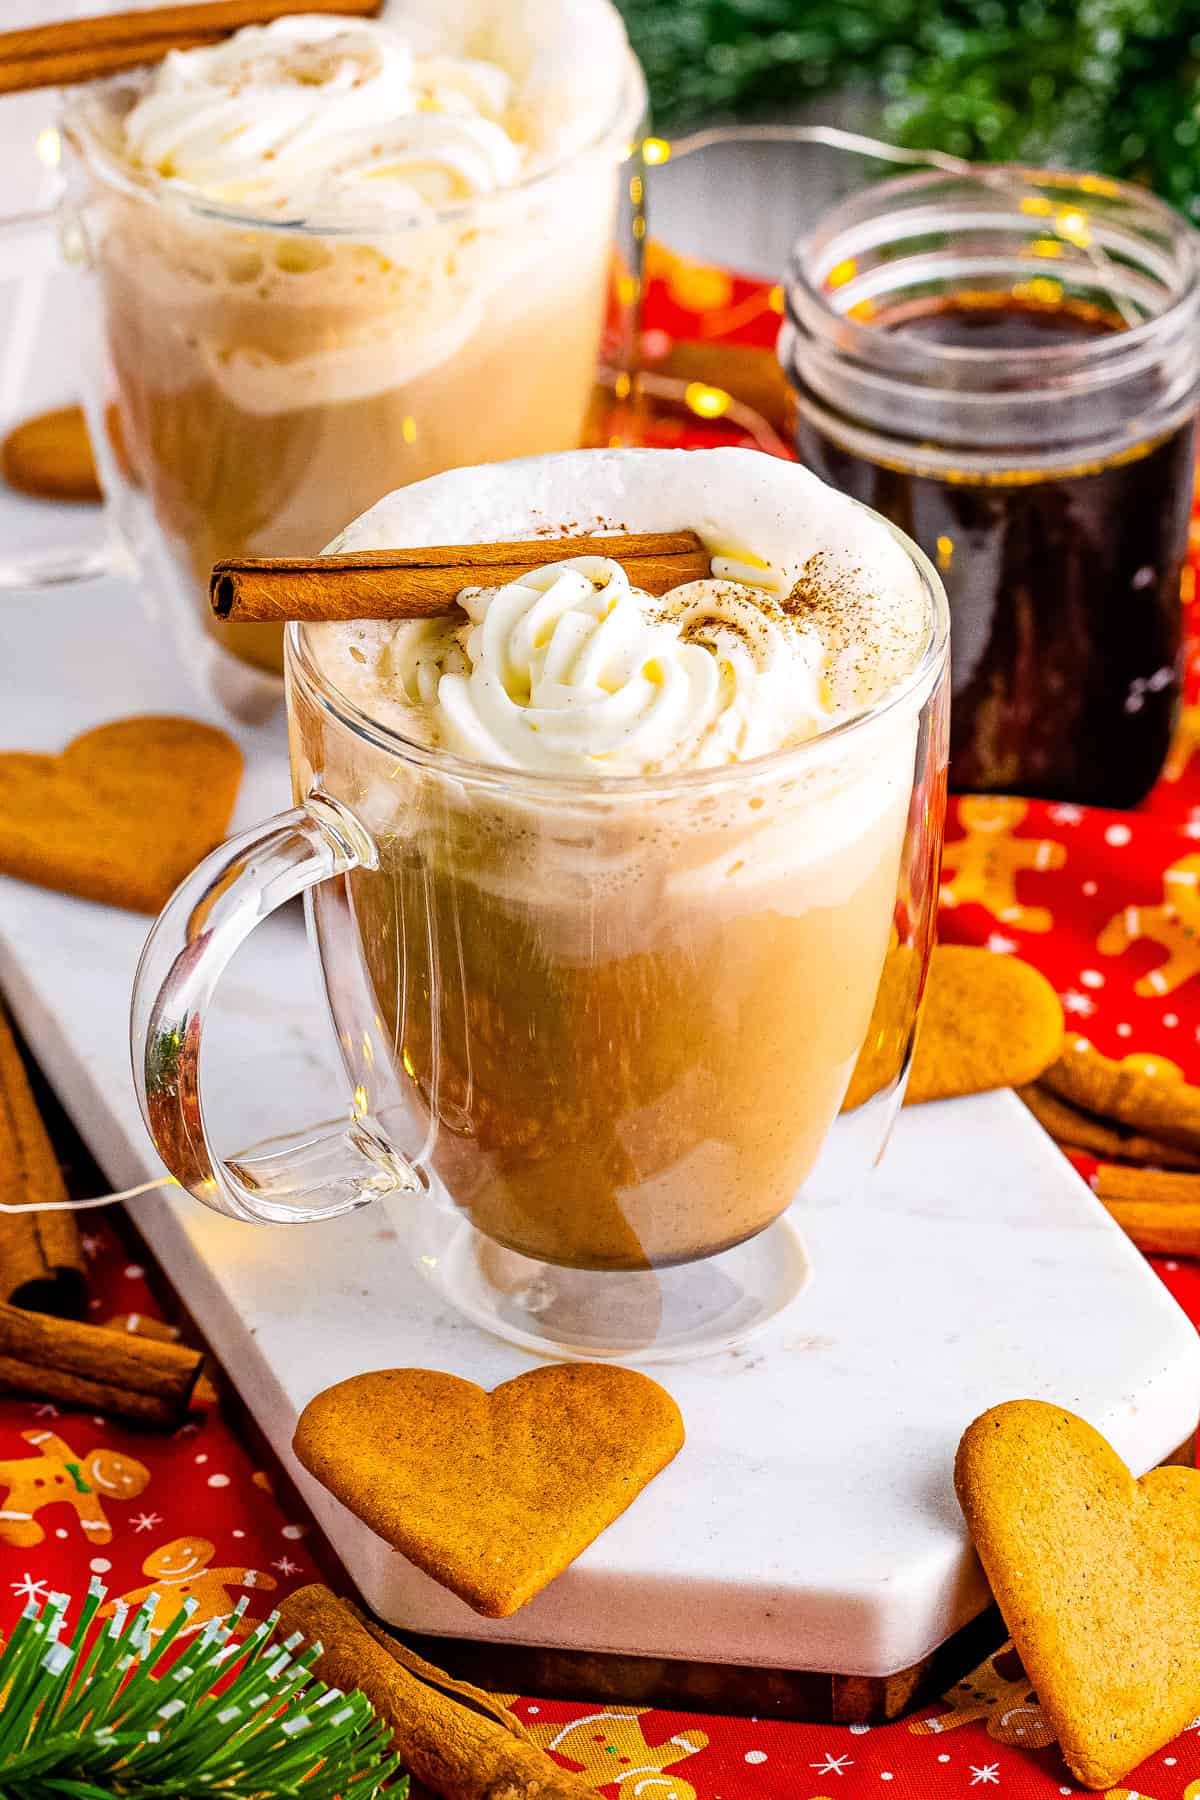 Gingerbread latte surrounded by gingerbread heart cookies, gingerbread syrup in a jar, and Christmas decor.